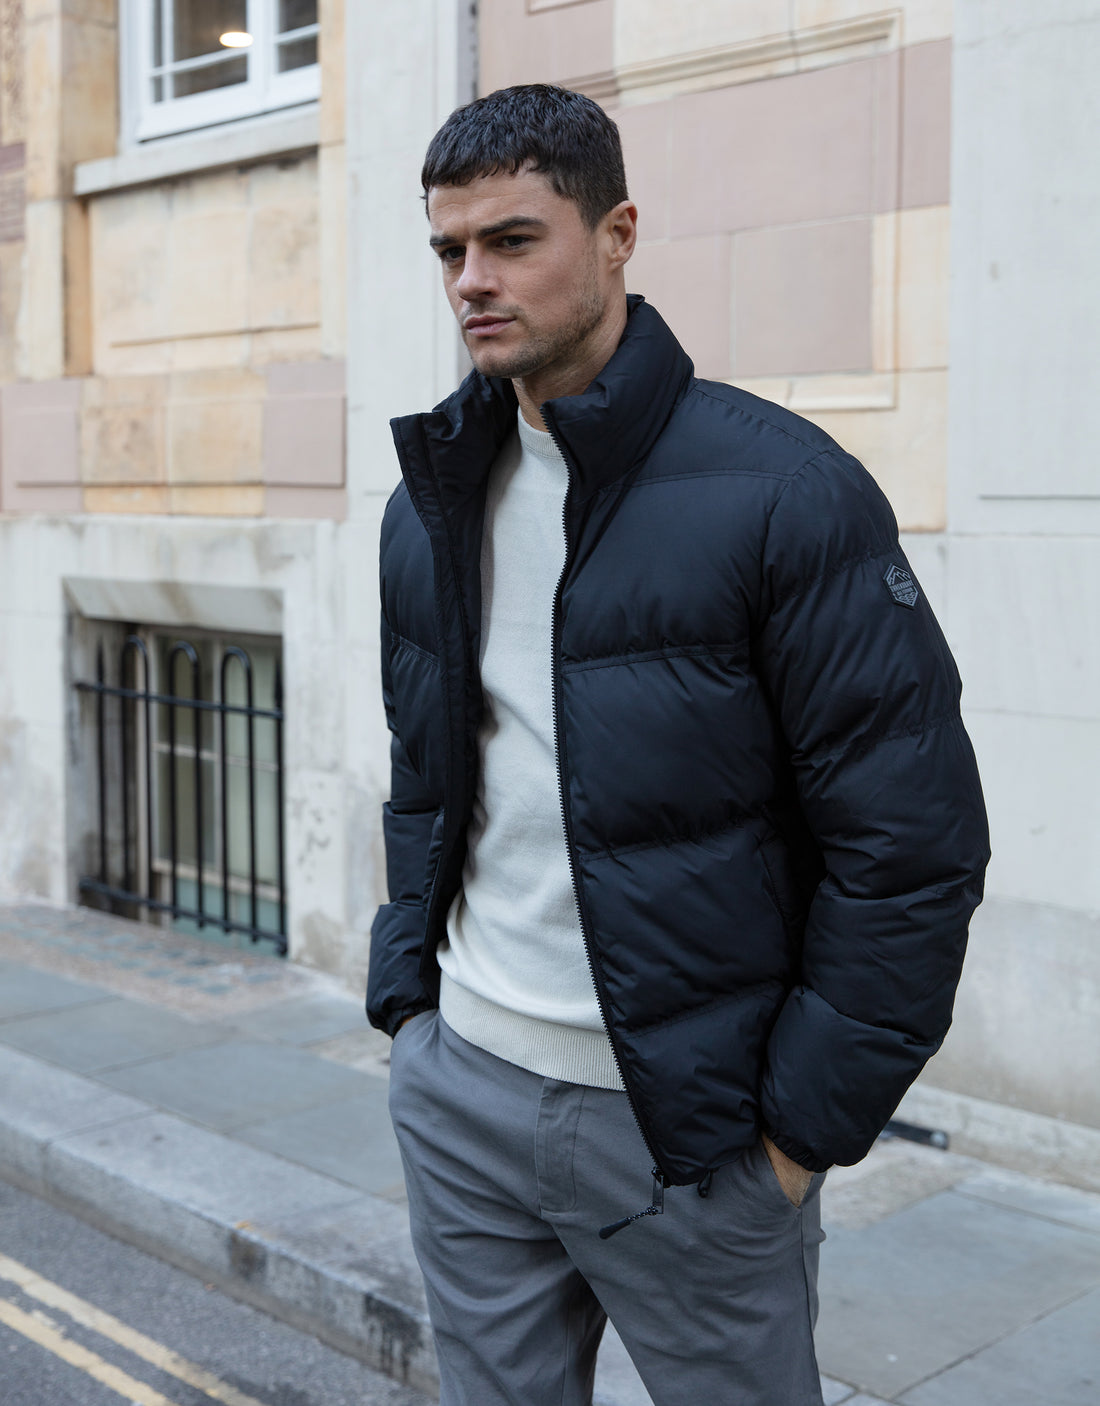 Hypothermia No-More: The Moncler Jacket – Mr Essentialist